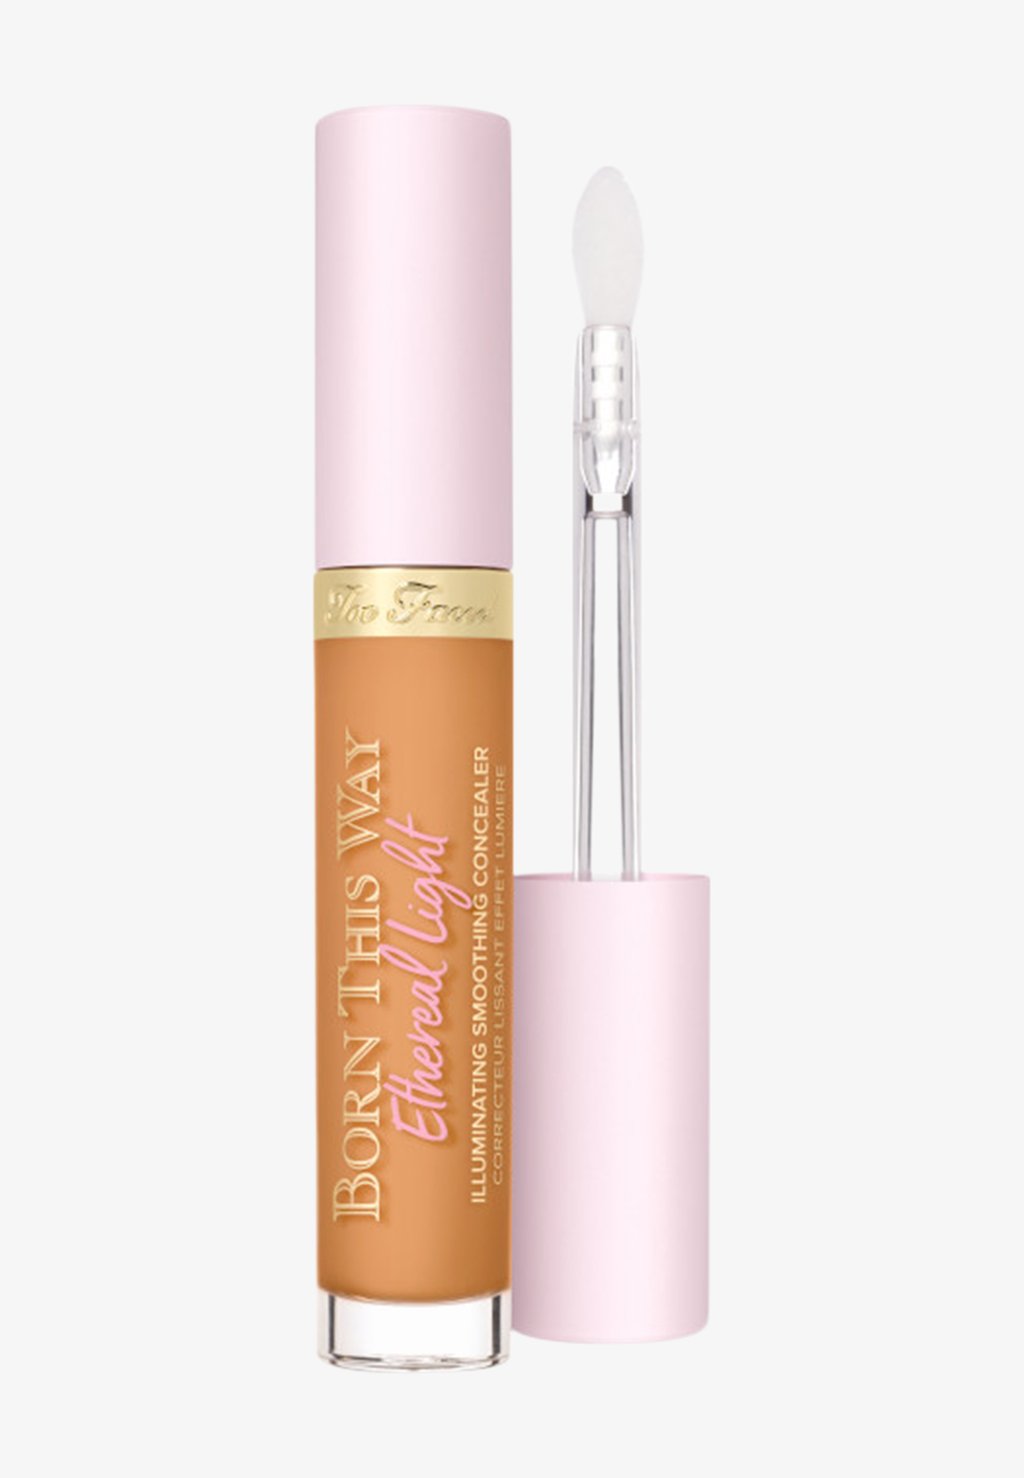 Консилер BORN THIS WAY ETHEREAL LIGHT CONCEALER Too Faced, цвет gingersnap